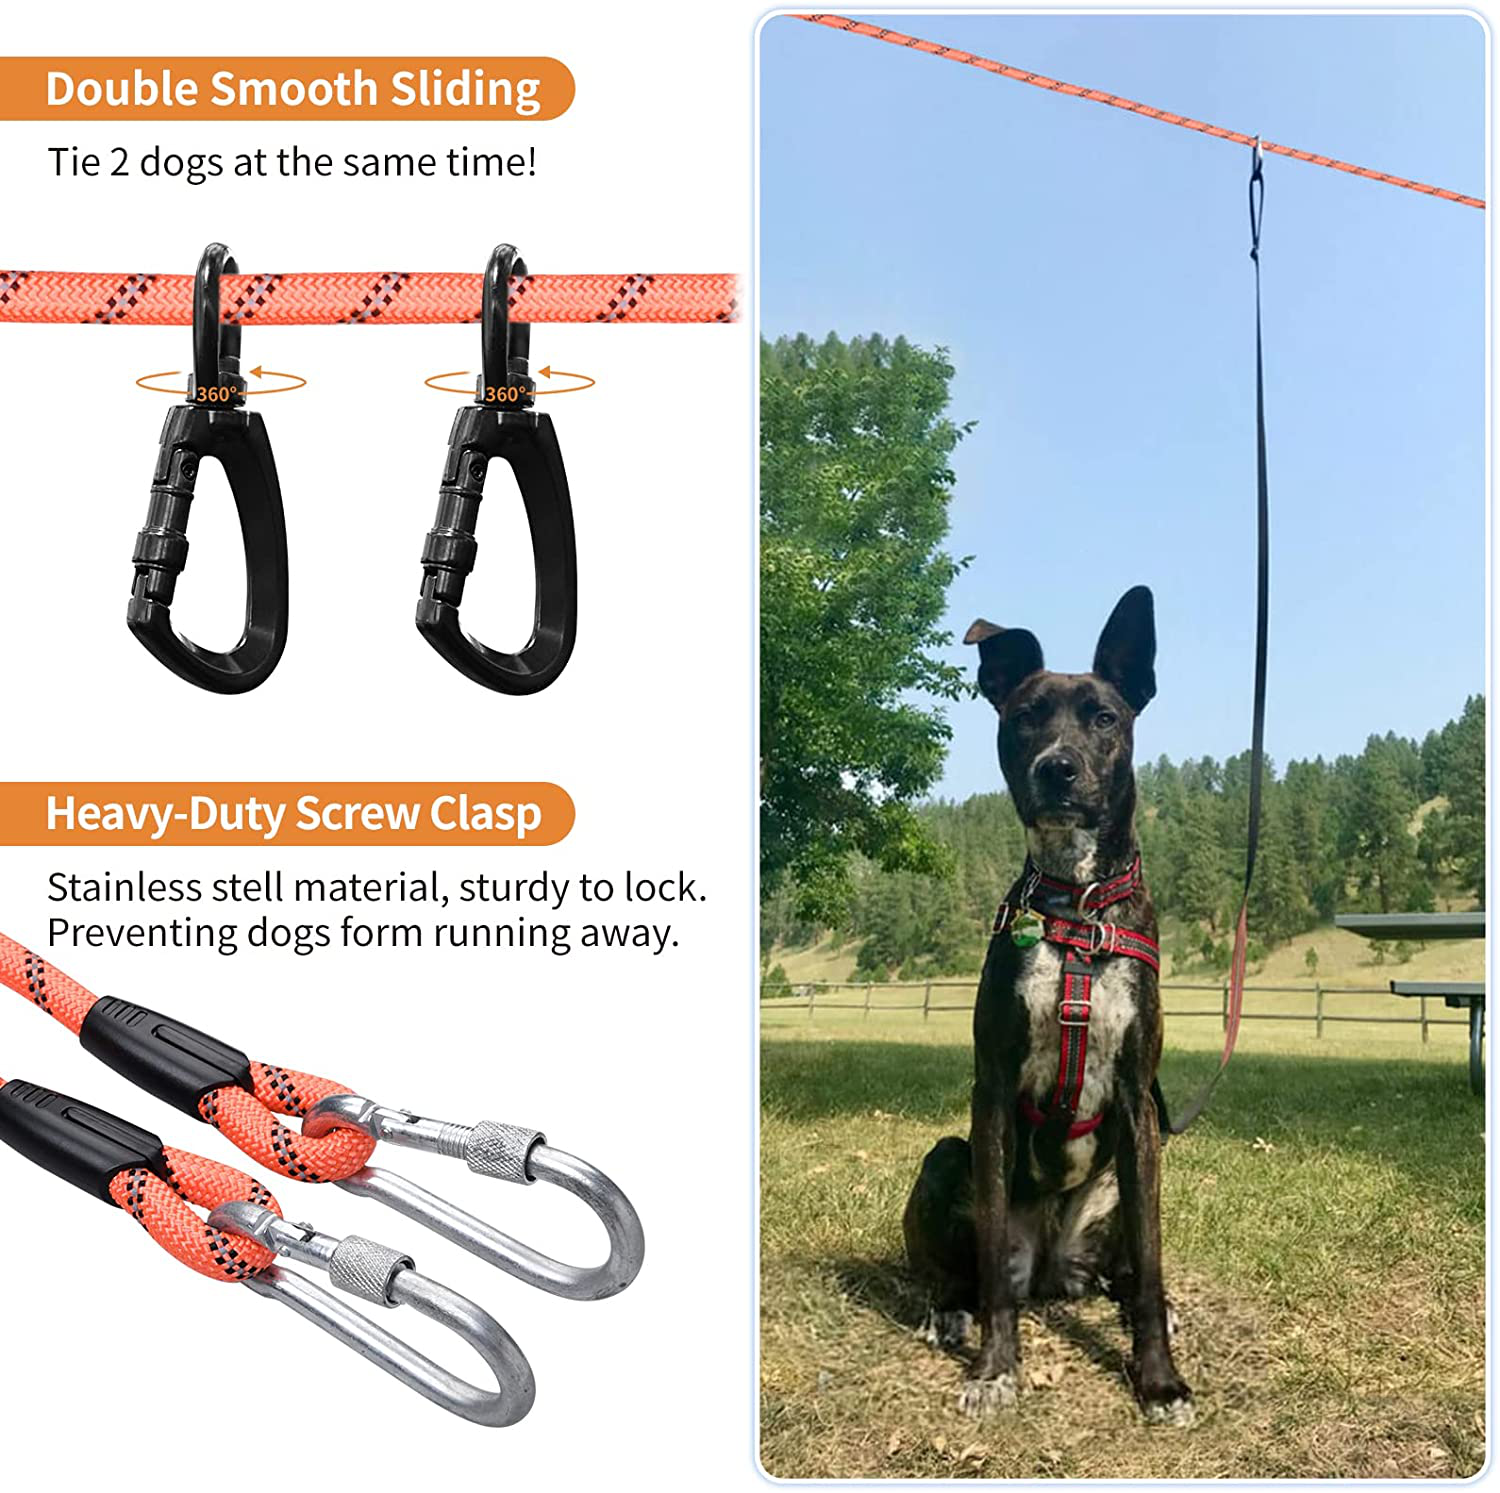 Dog Tie Out Cable for Yard, 50Ft Aerial Dog Runner Trolley System for 2 Dogs, Dog Run Zip Line with Dog Rope Toy for Large Dogs up to 200Lbs, Camping, Backyard, Outside